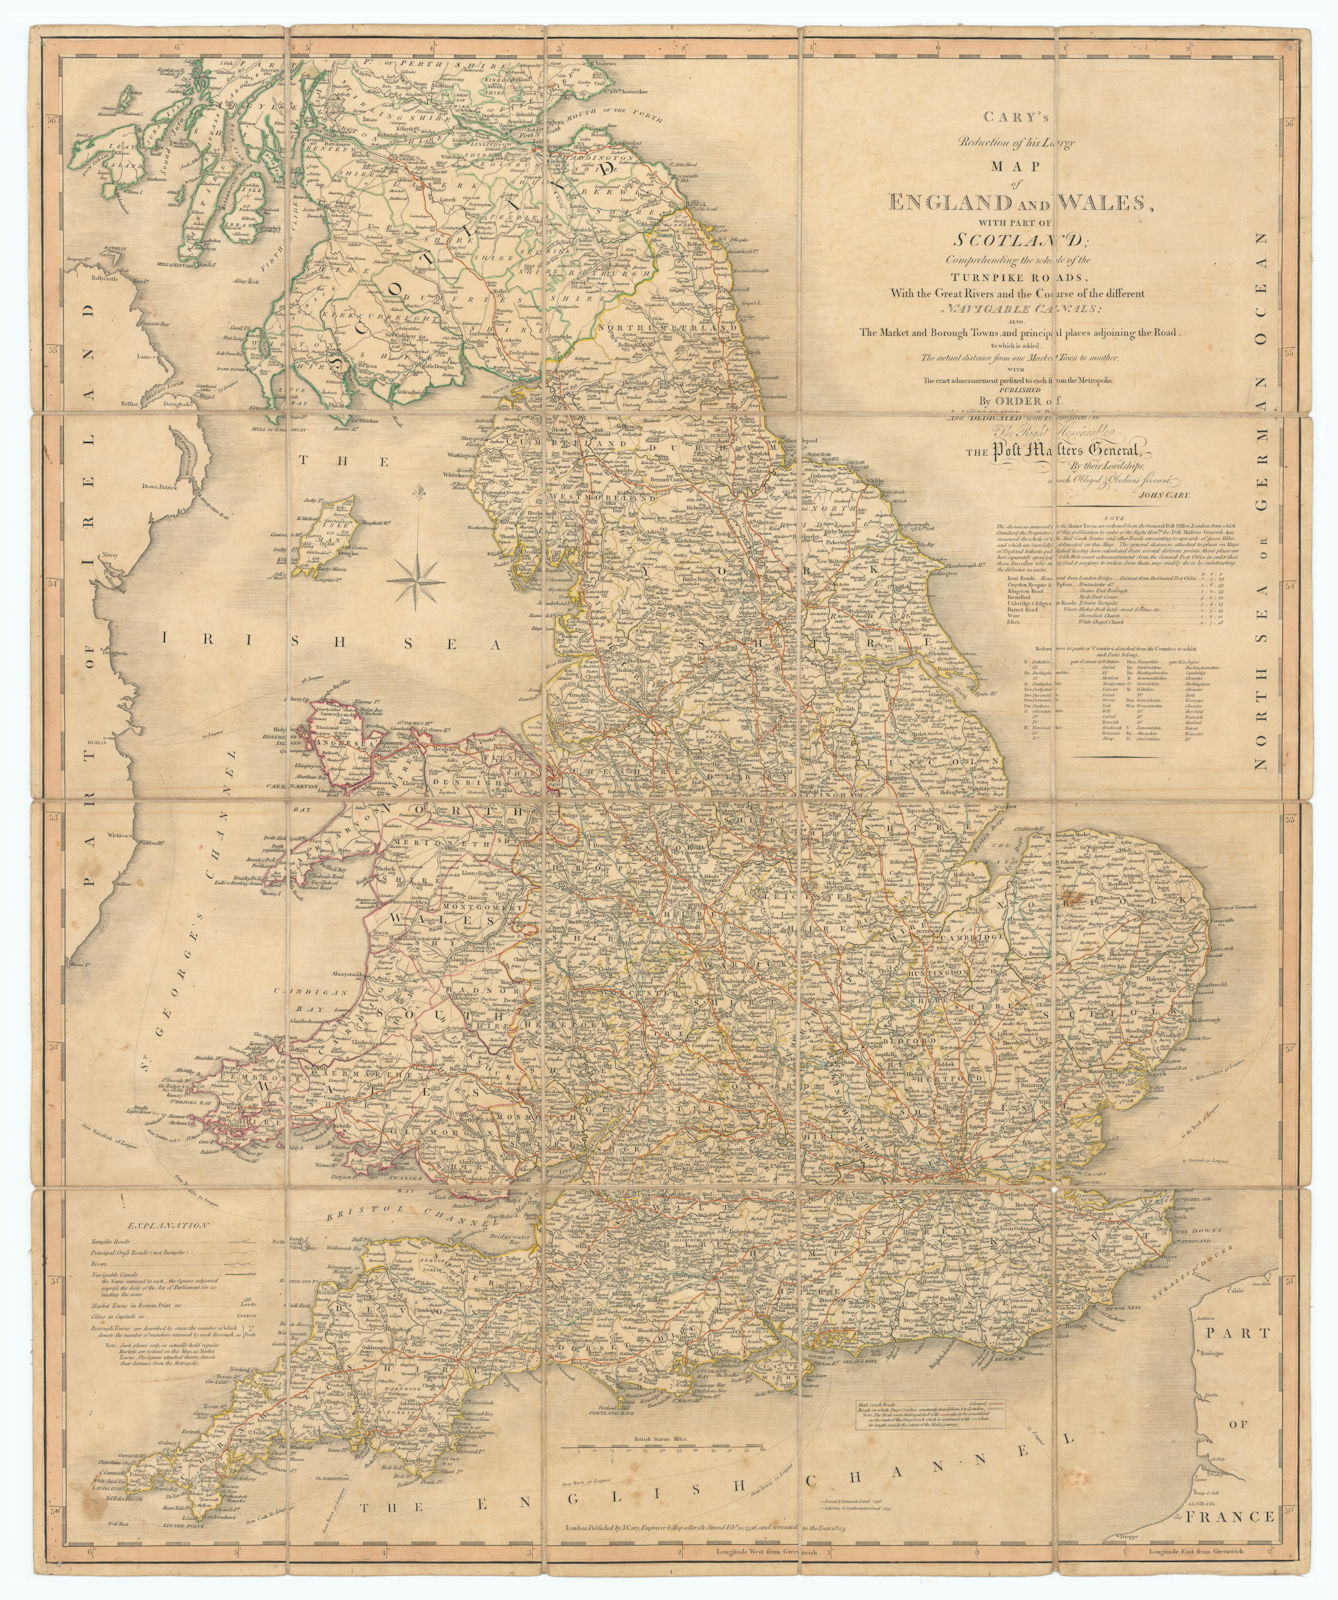 Associate Product 'Cary's reduction of his large map of England & Wales'. Turnpikes canals &c 1805